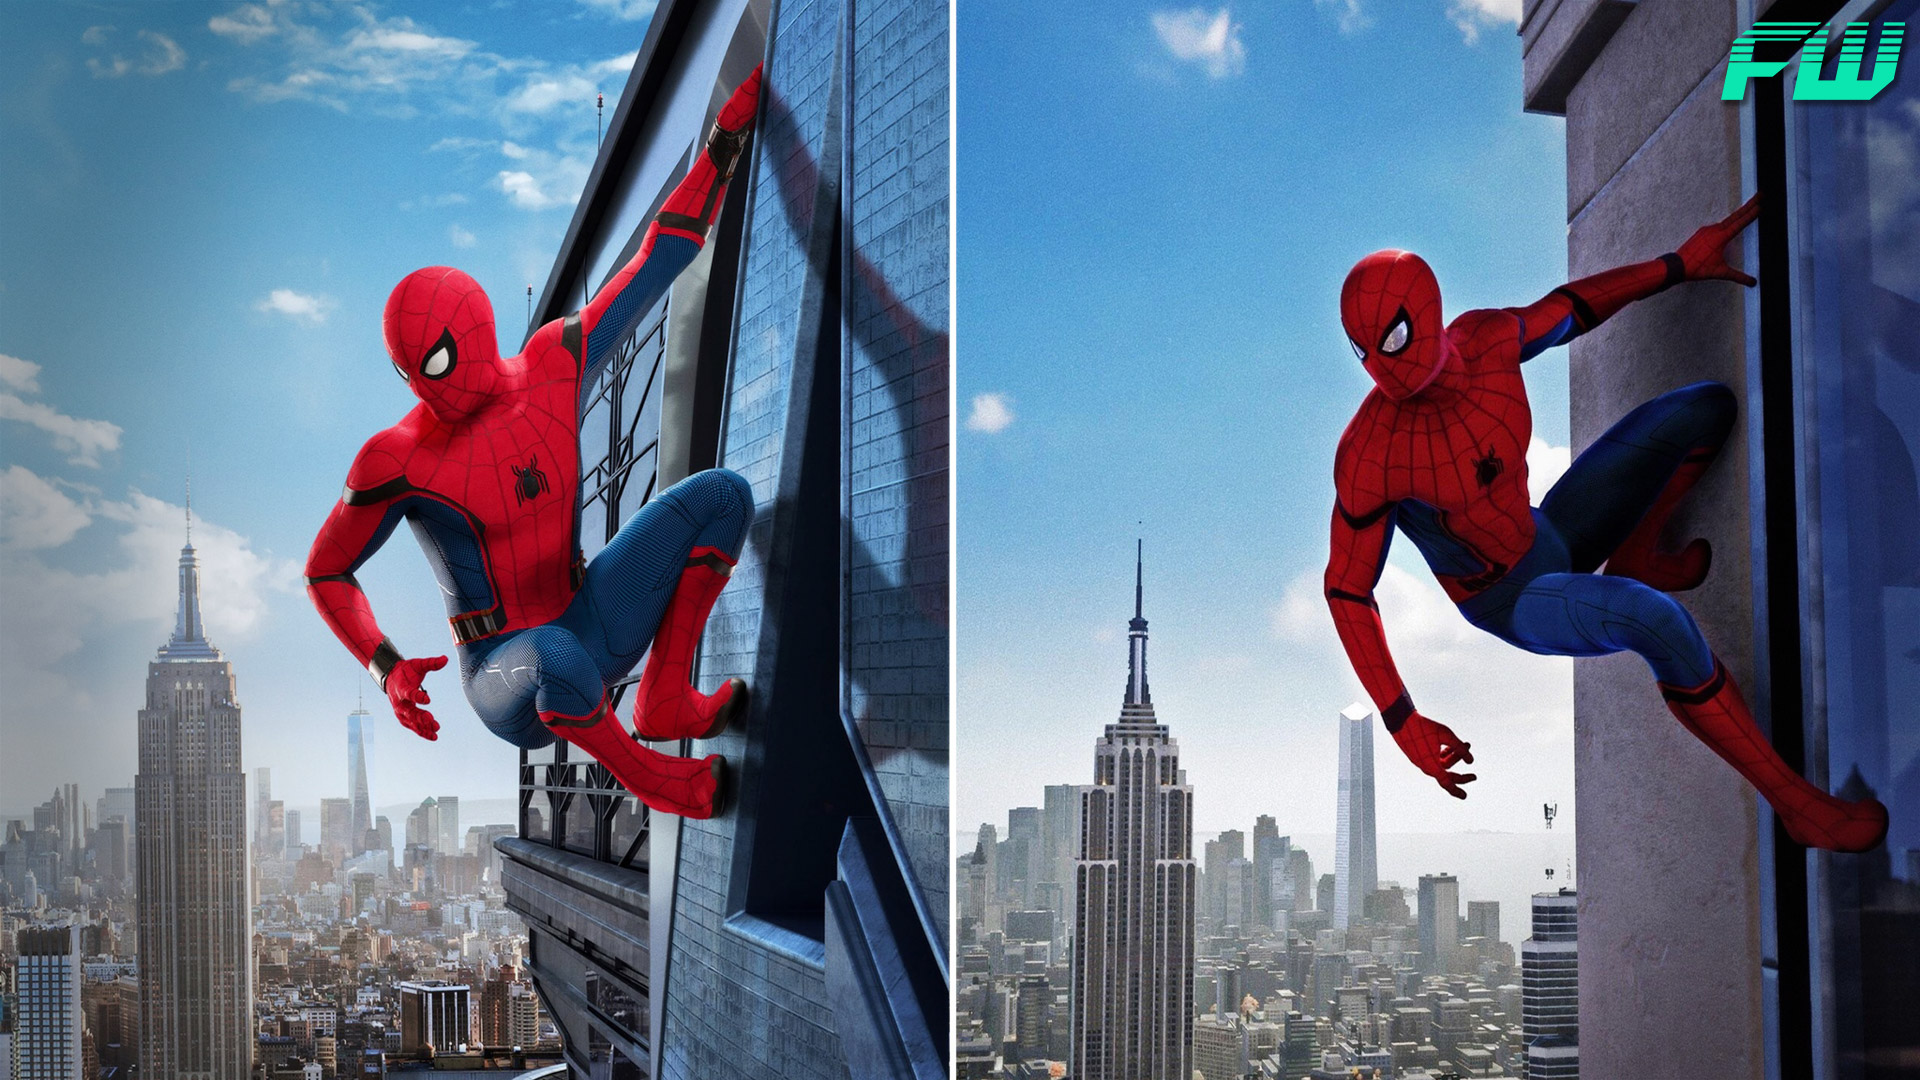 20 Tremendous Photo Mode Images From Spider-Man PS4 Game - FandomWire